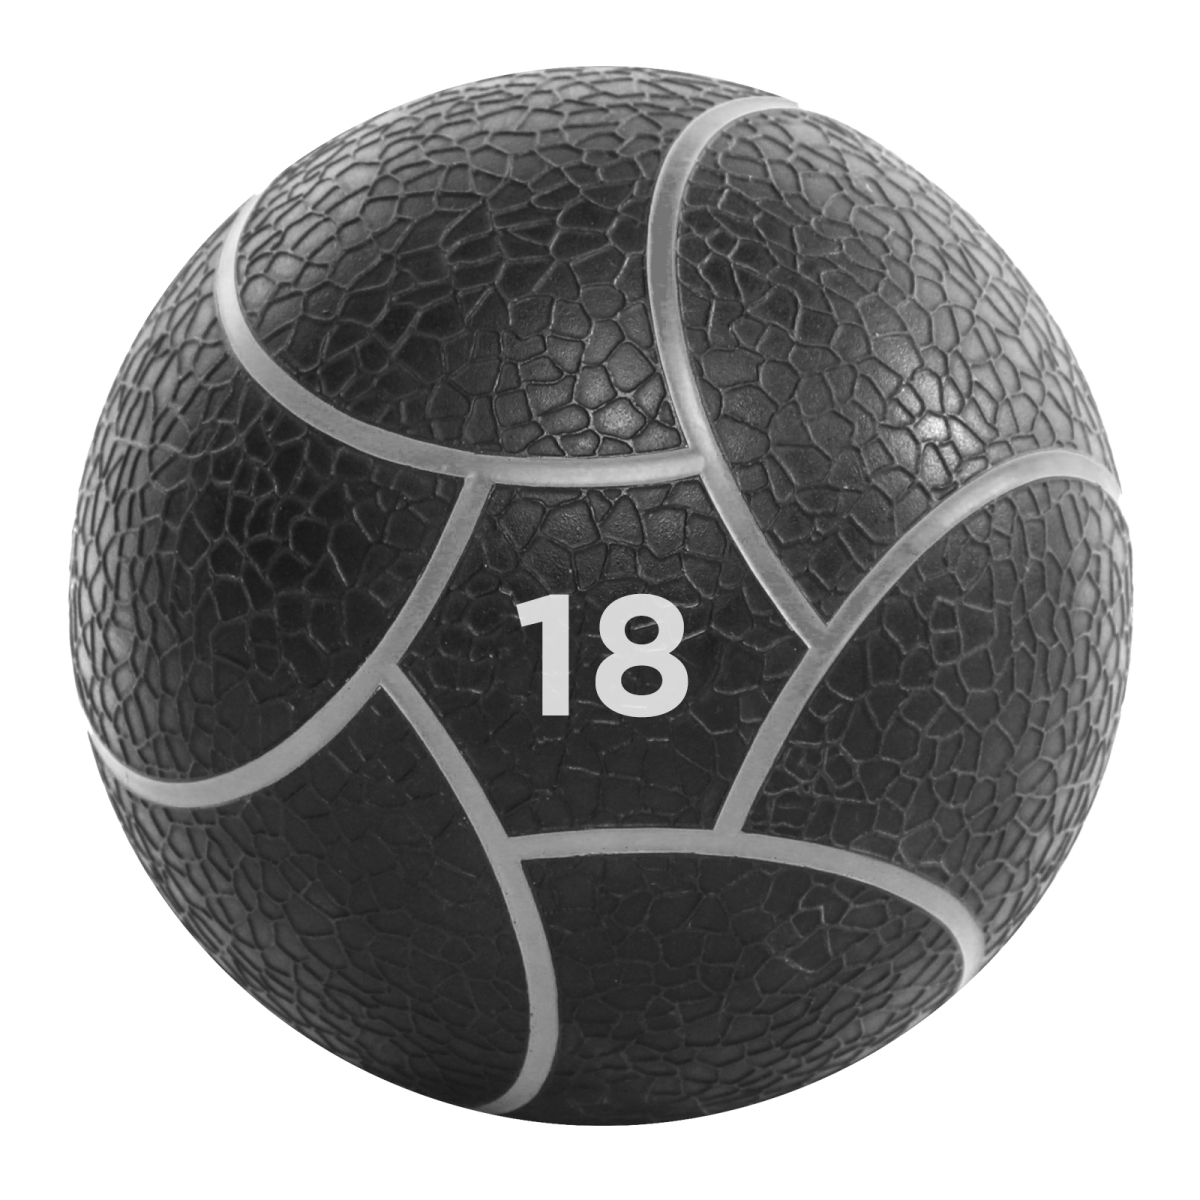 Picture of Power Systems 25718 Elite Power Med Ball  Prime 18 lb. Gray